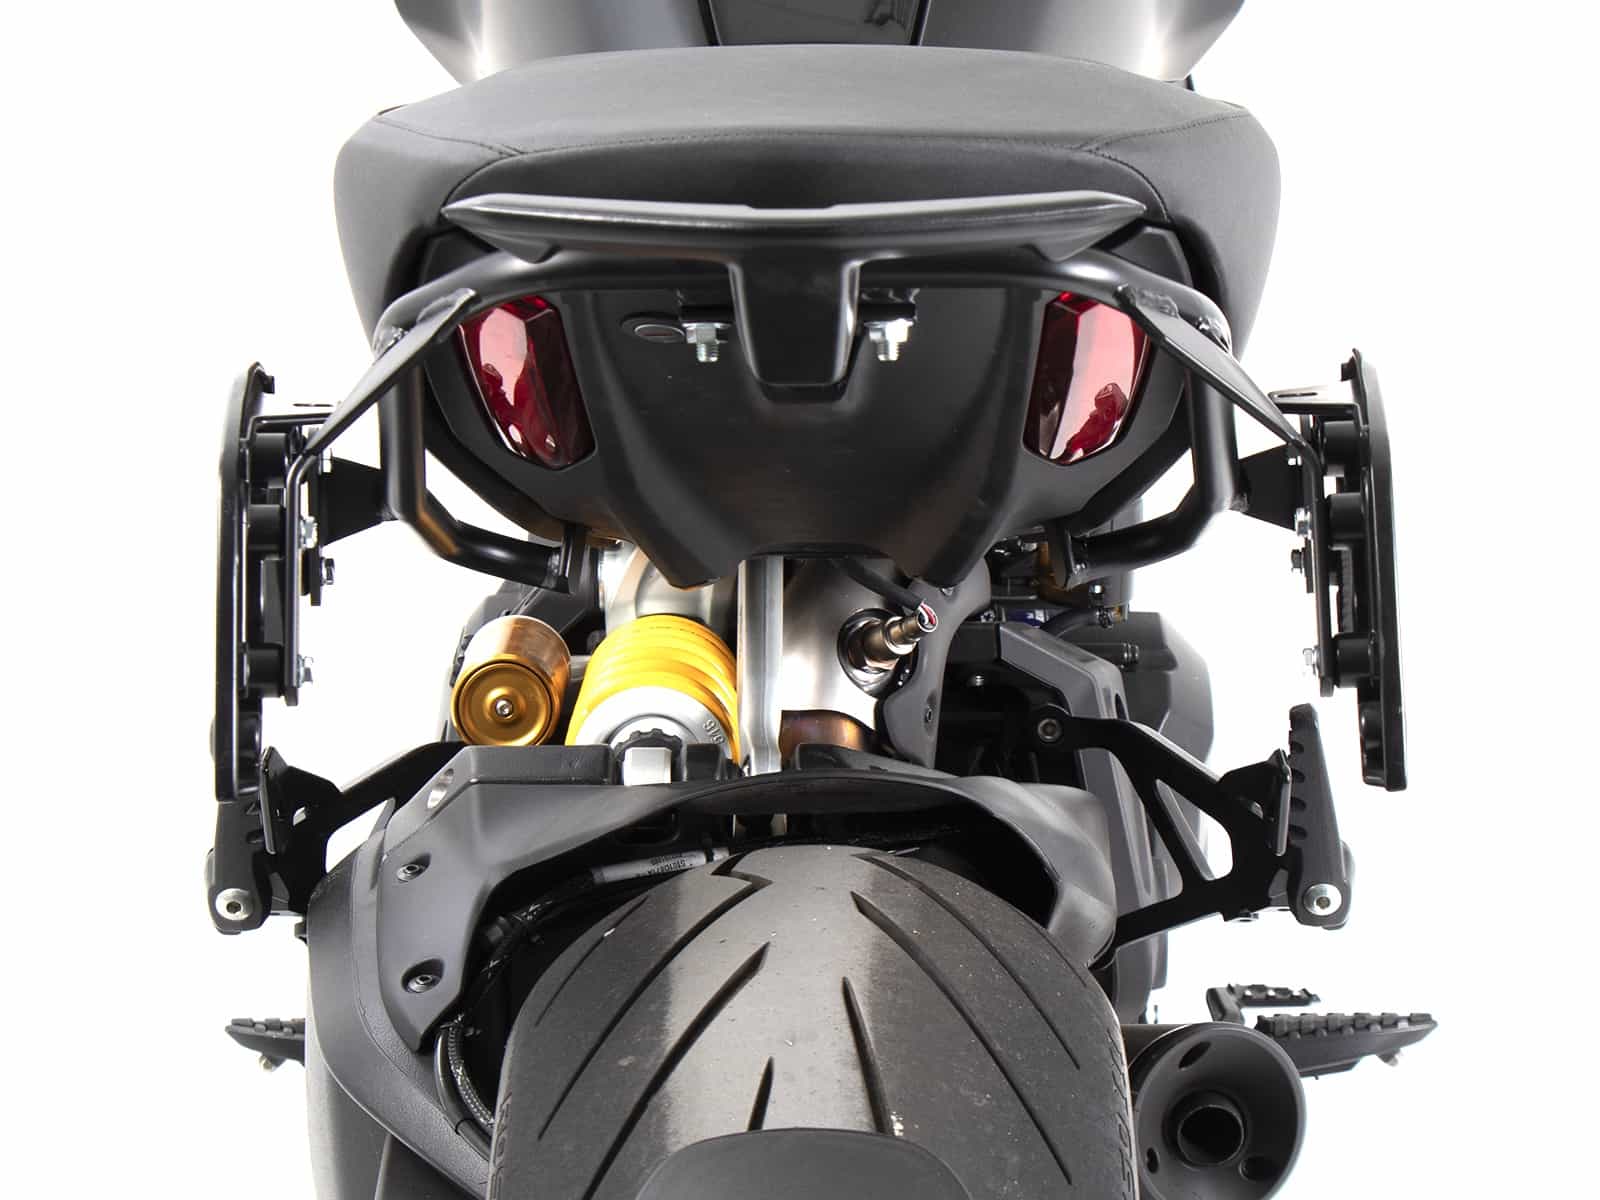 C-Bow sidecarrier for Ducati Diavel 1260/S (2019-)